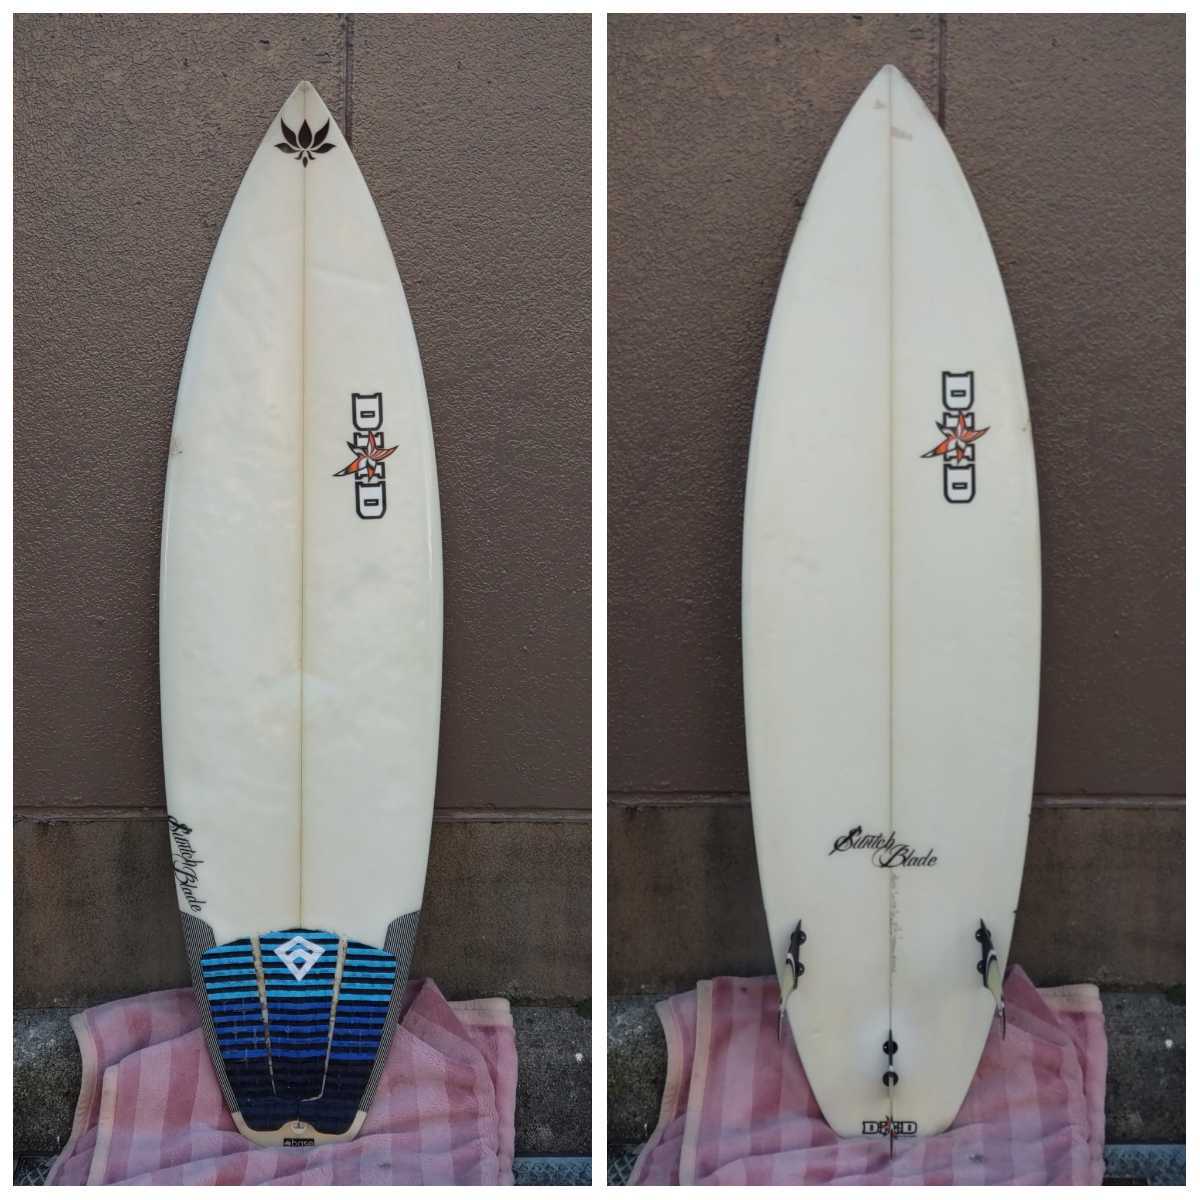 DHD SwitchBlade ショートボード 5´10ft トライフィン RFC 4.5 Turbo-I bace BOARDS AND SURF EQUIPMENT サーフボード 配送不可